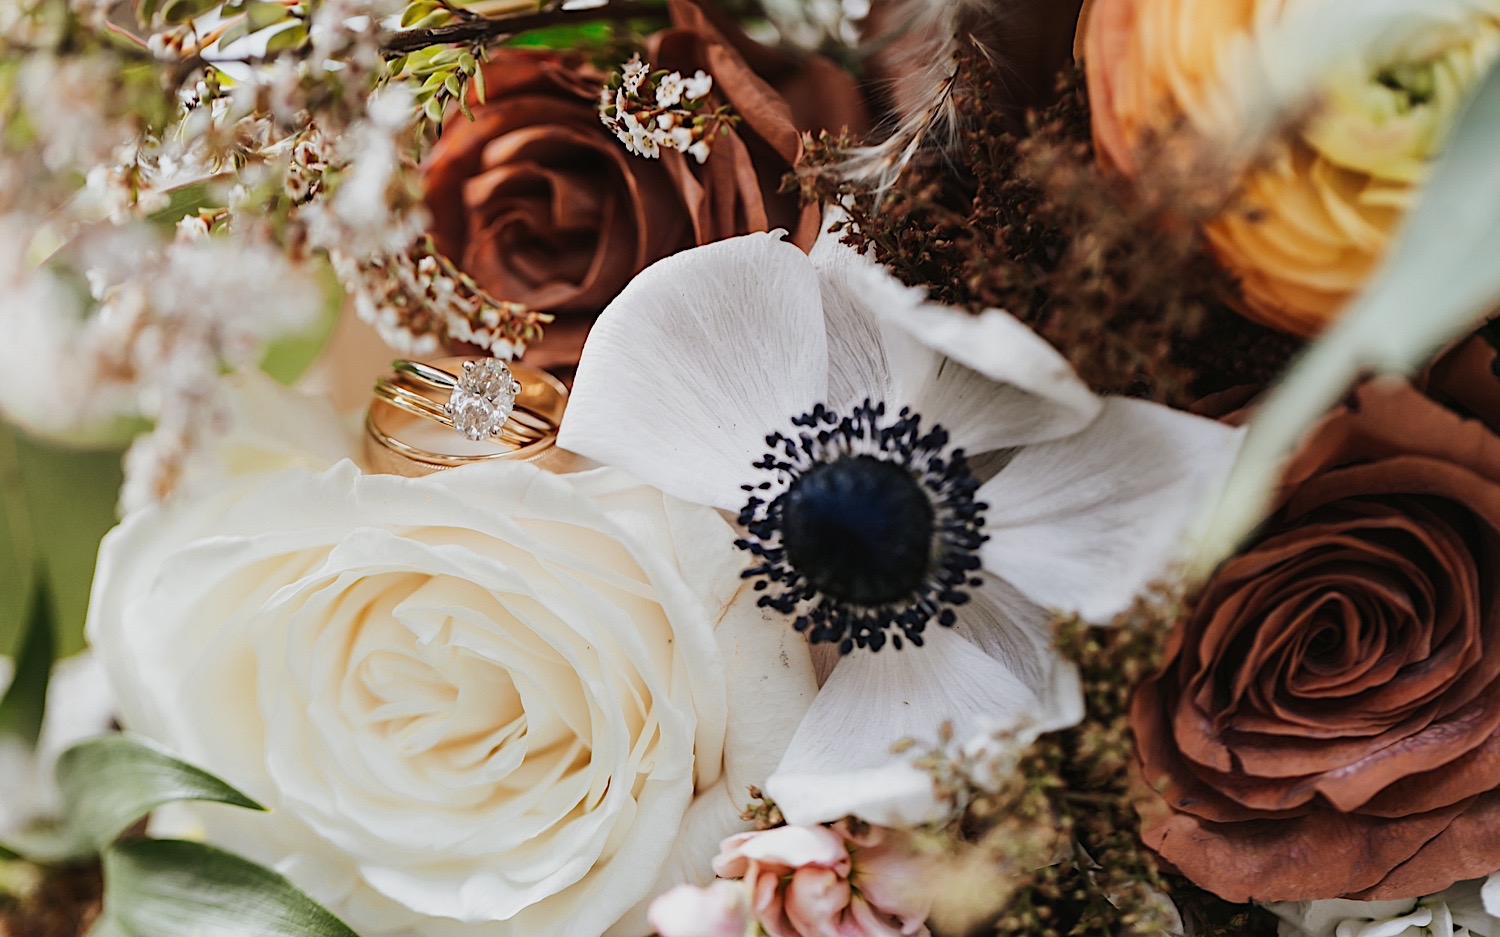 Close up photo of a flower in a wedding bouquet